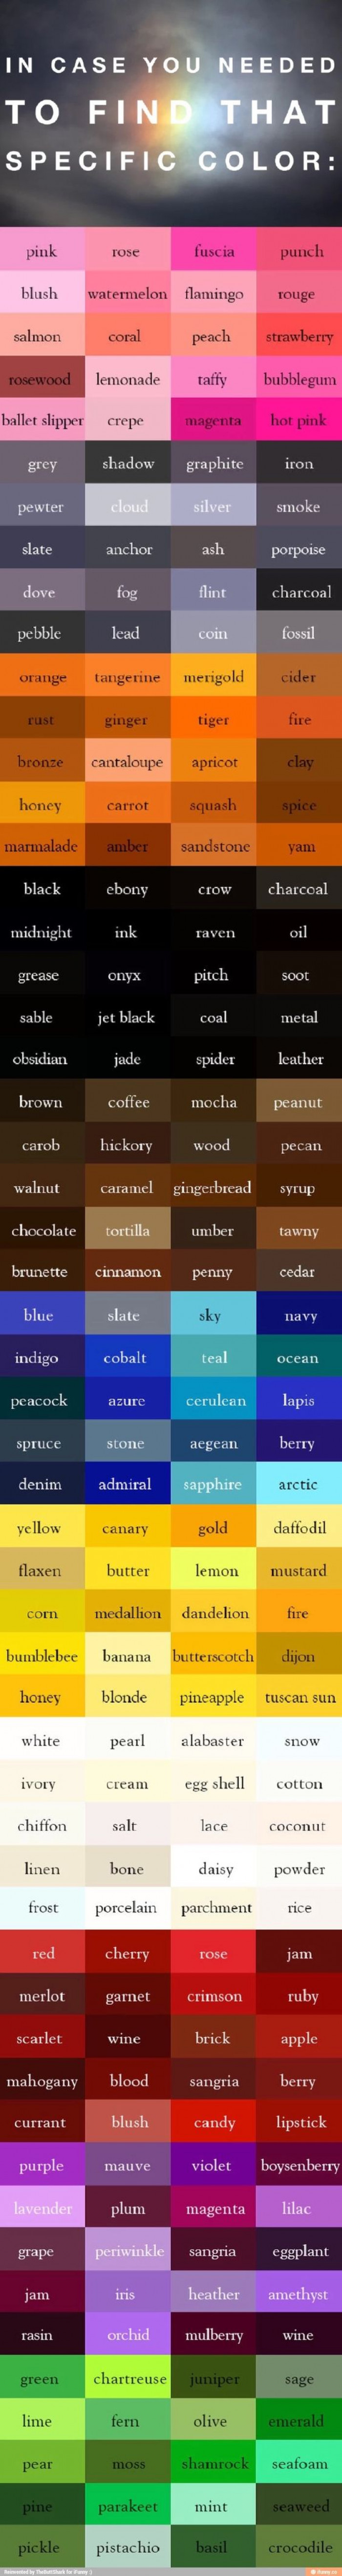 Very Useful Chart Incase You Need To Find A Specific Color - LadBlab